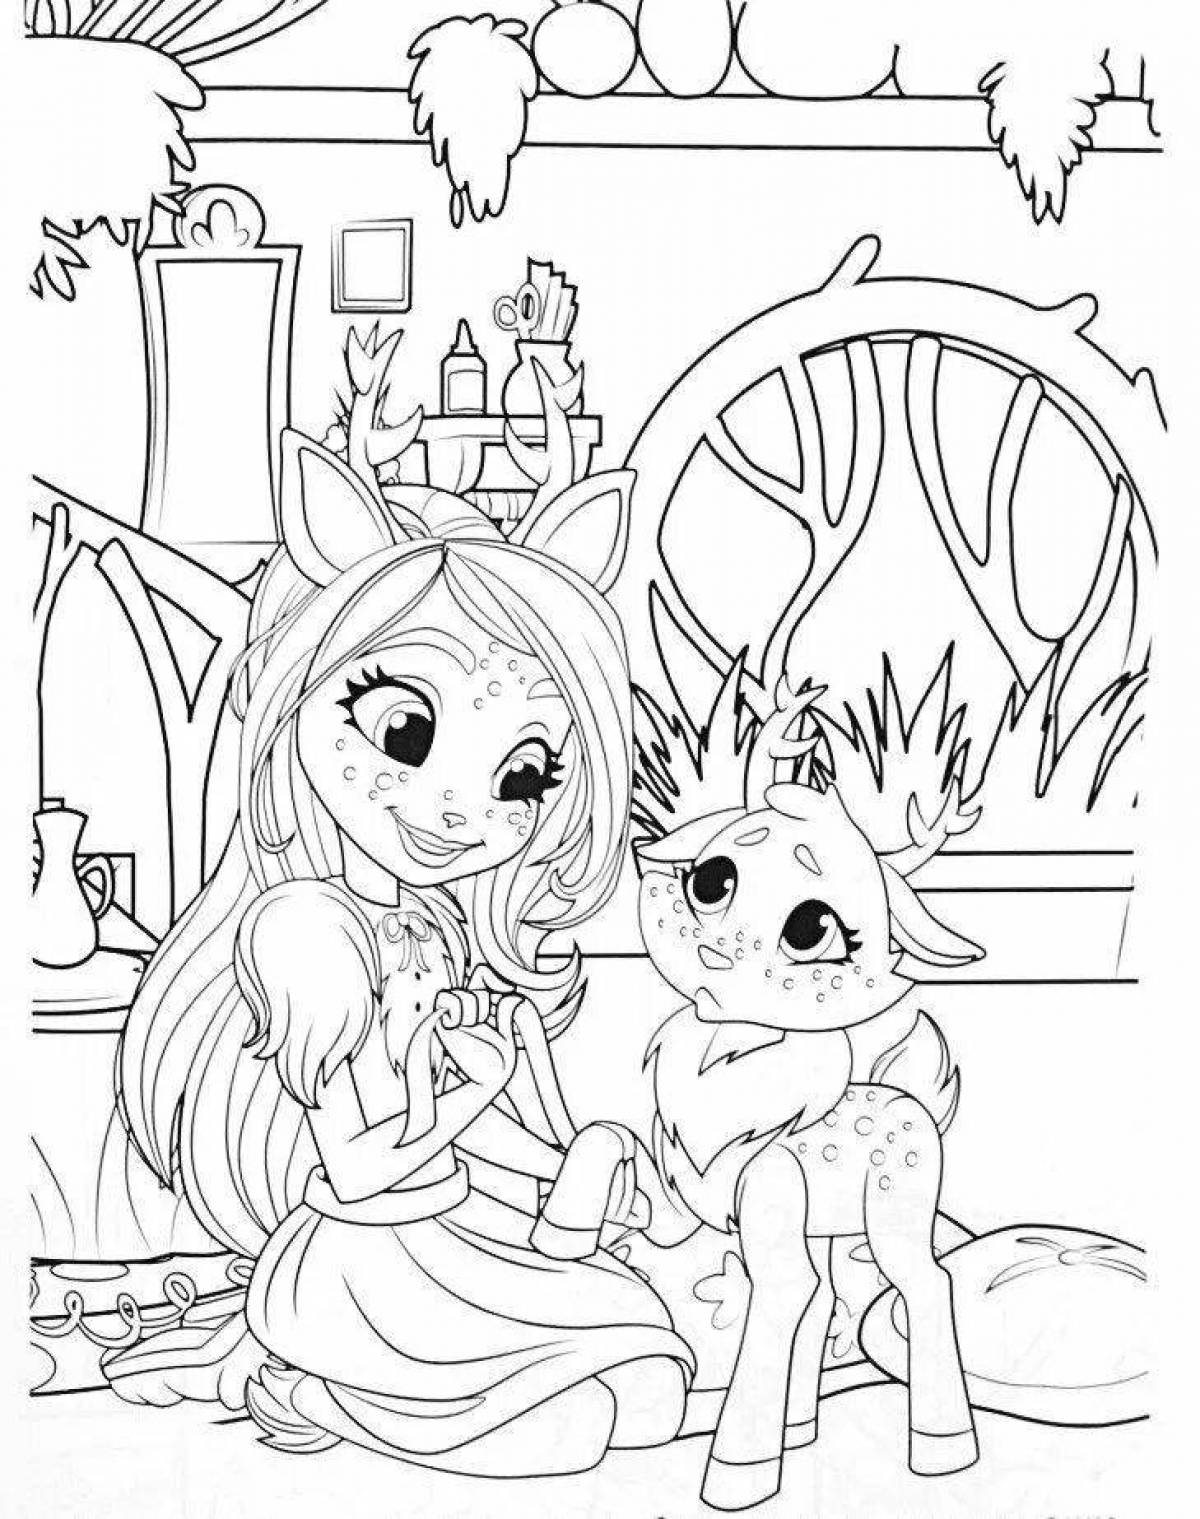 Incantimuls animated coloring page